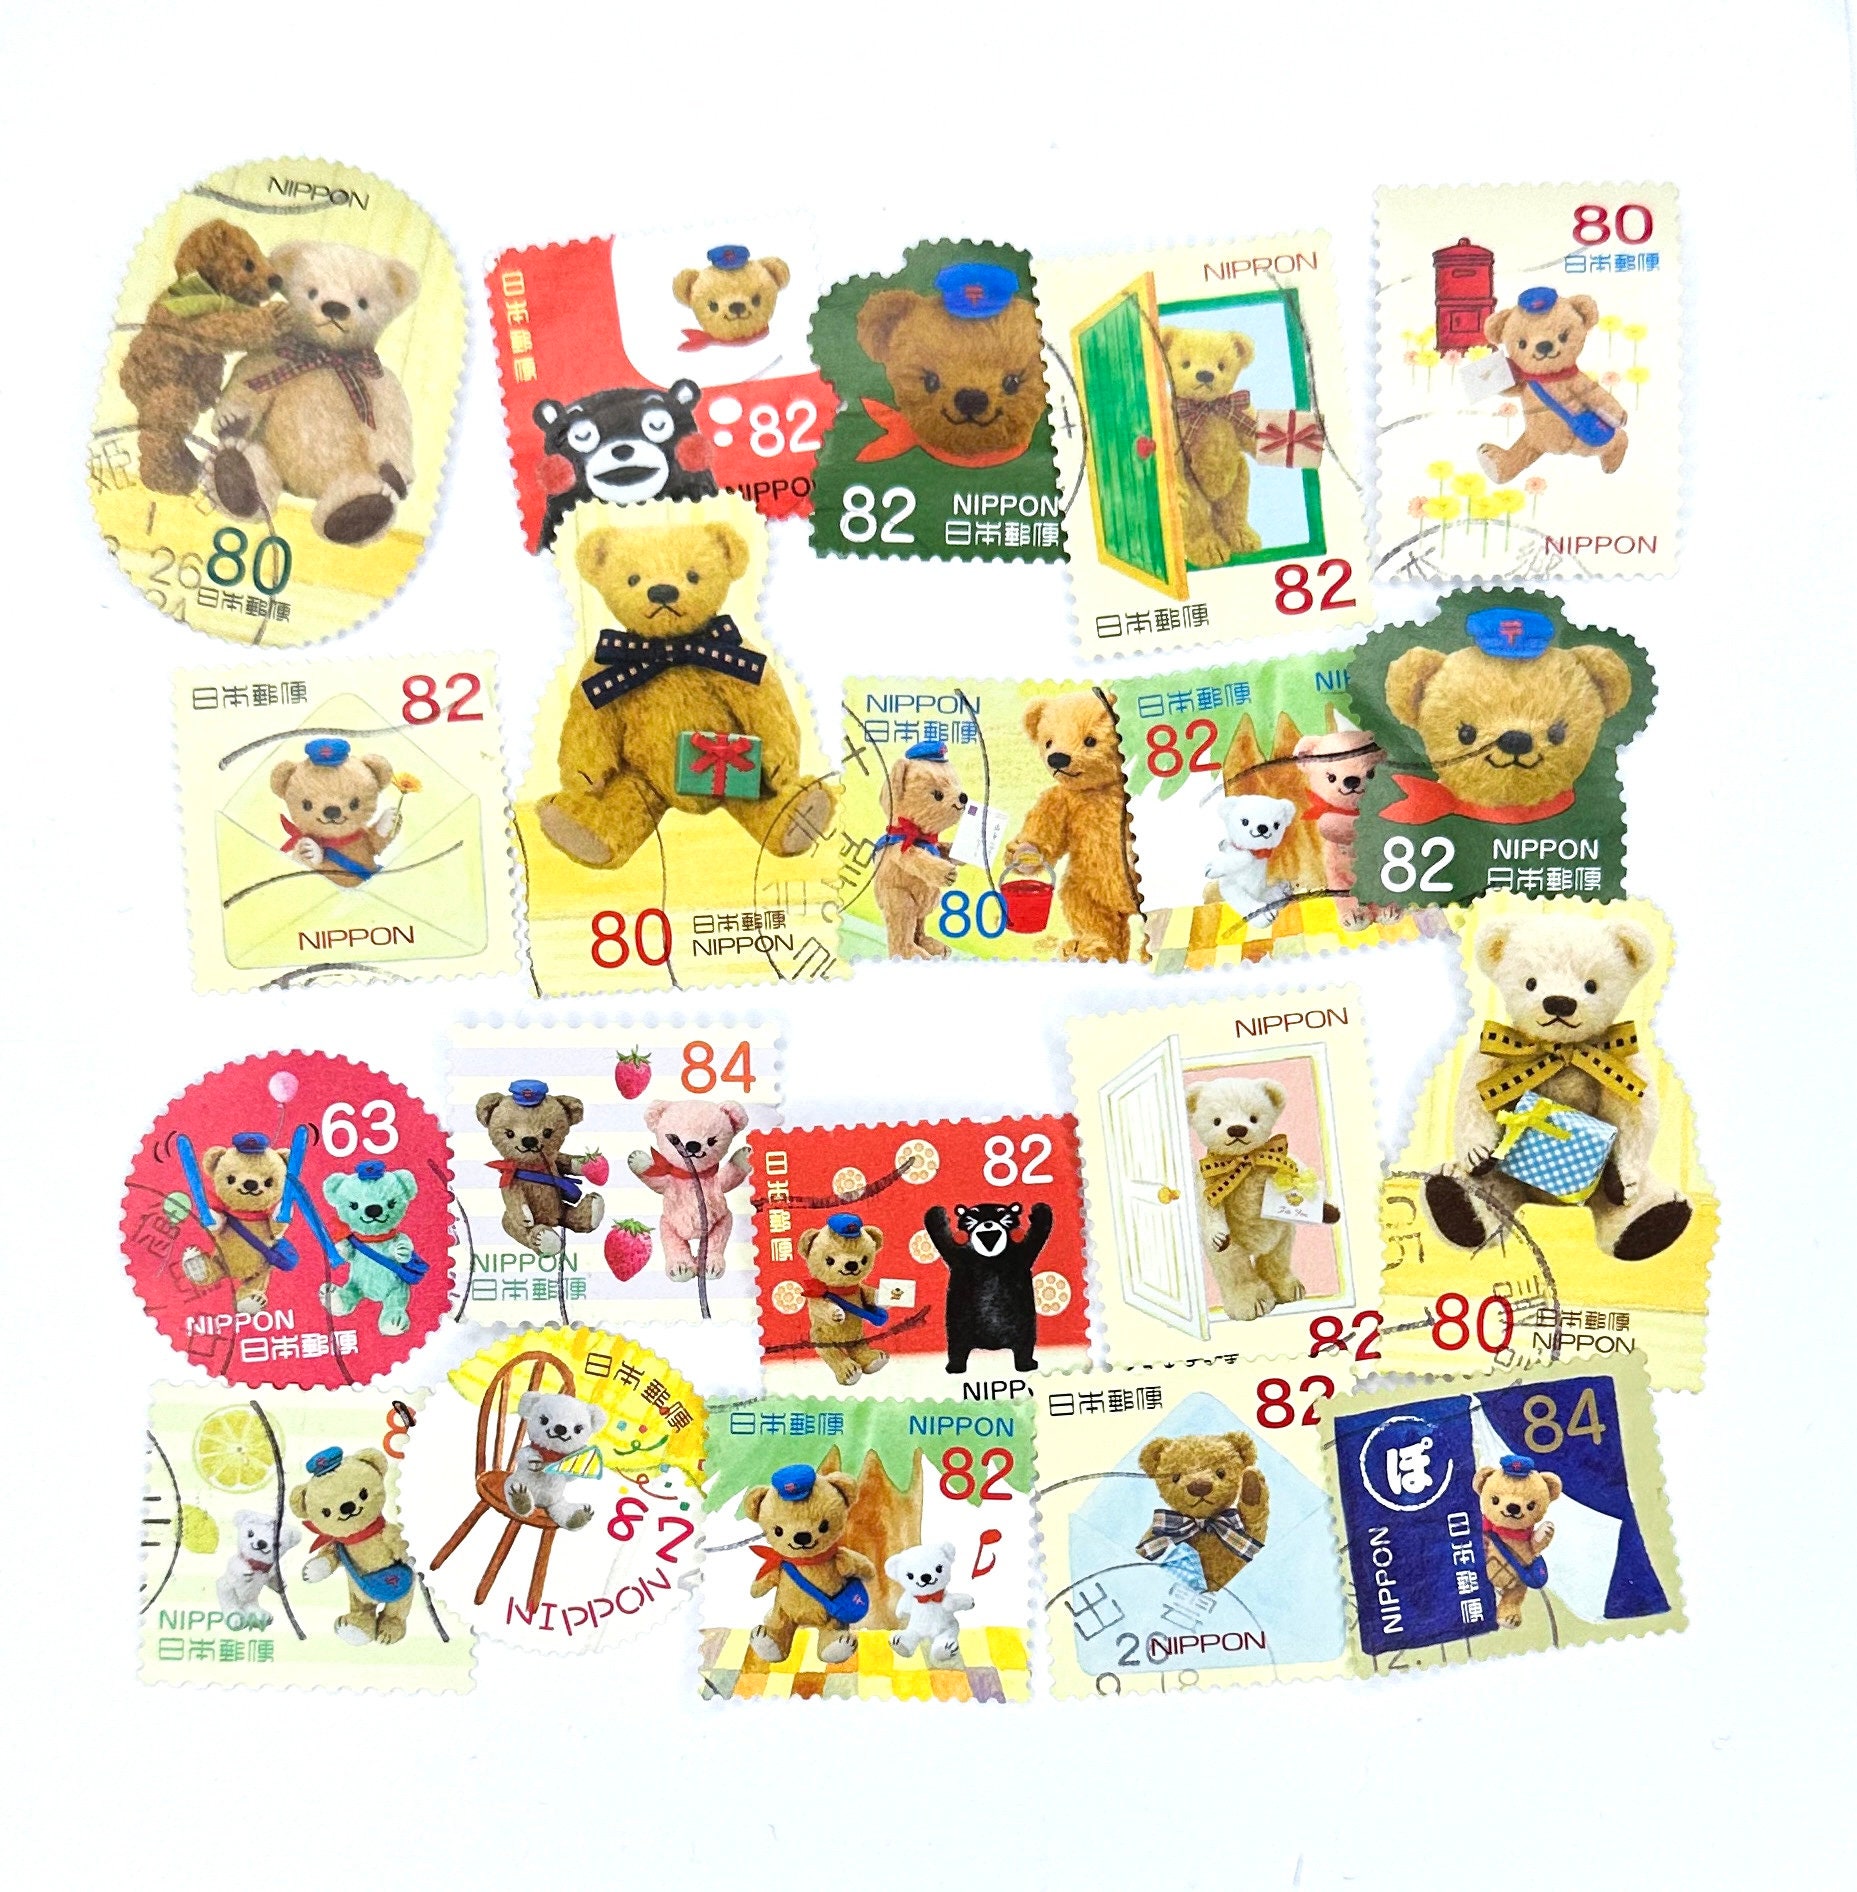 20 x Posukuma & Teddy Bear cute Japanese used postage stamps - off paper -  all different - Japan - Nippon - Set 1